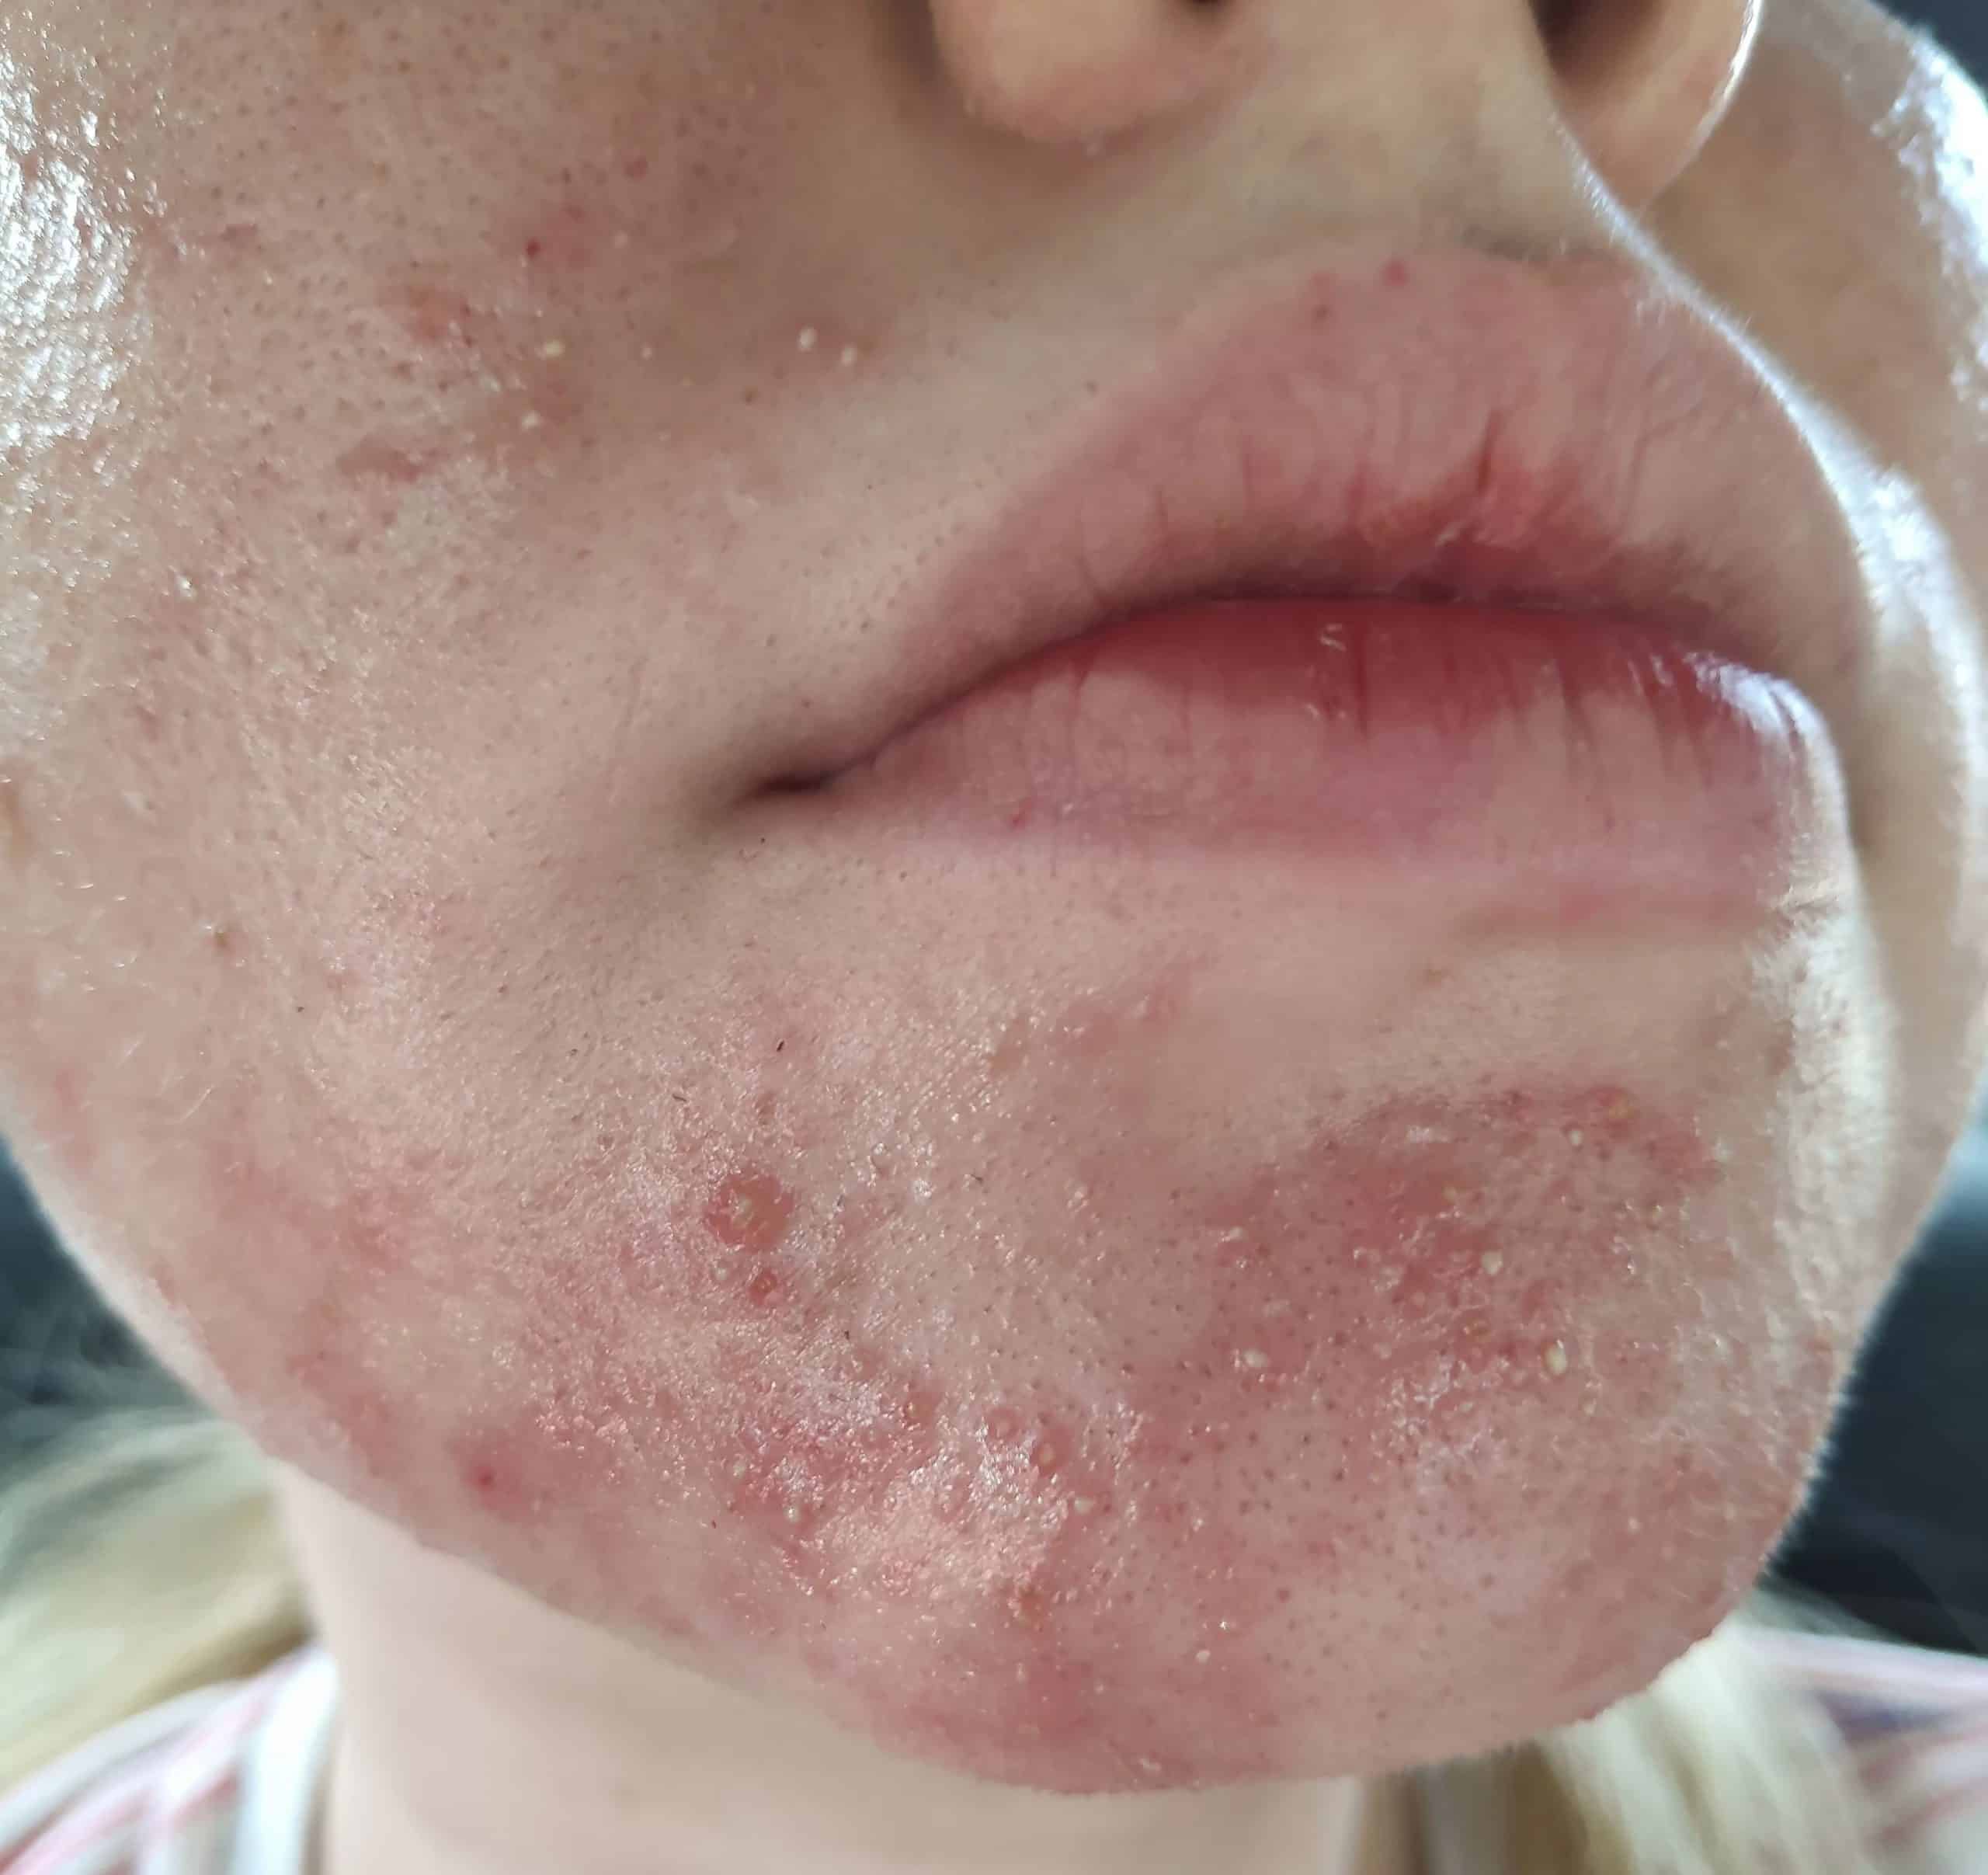 From Fungal Acne/Folliculitis to Clear Skin (with Pictures)